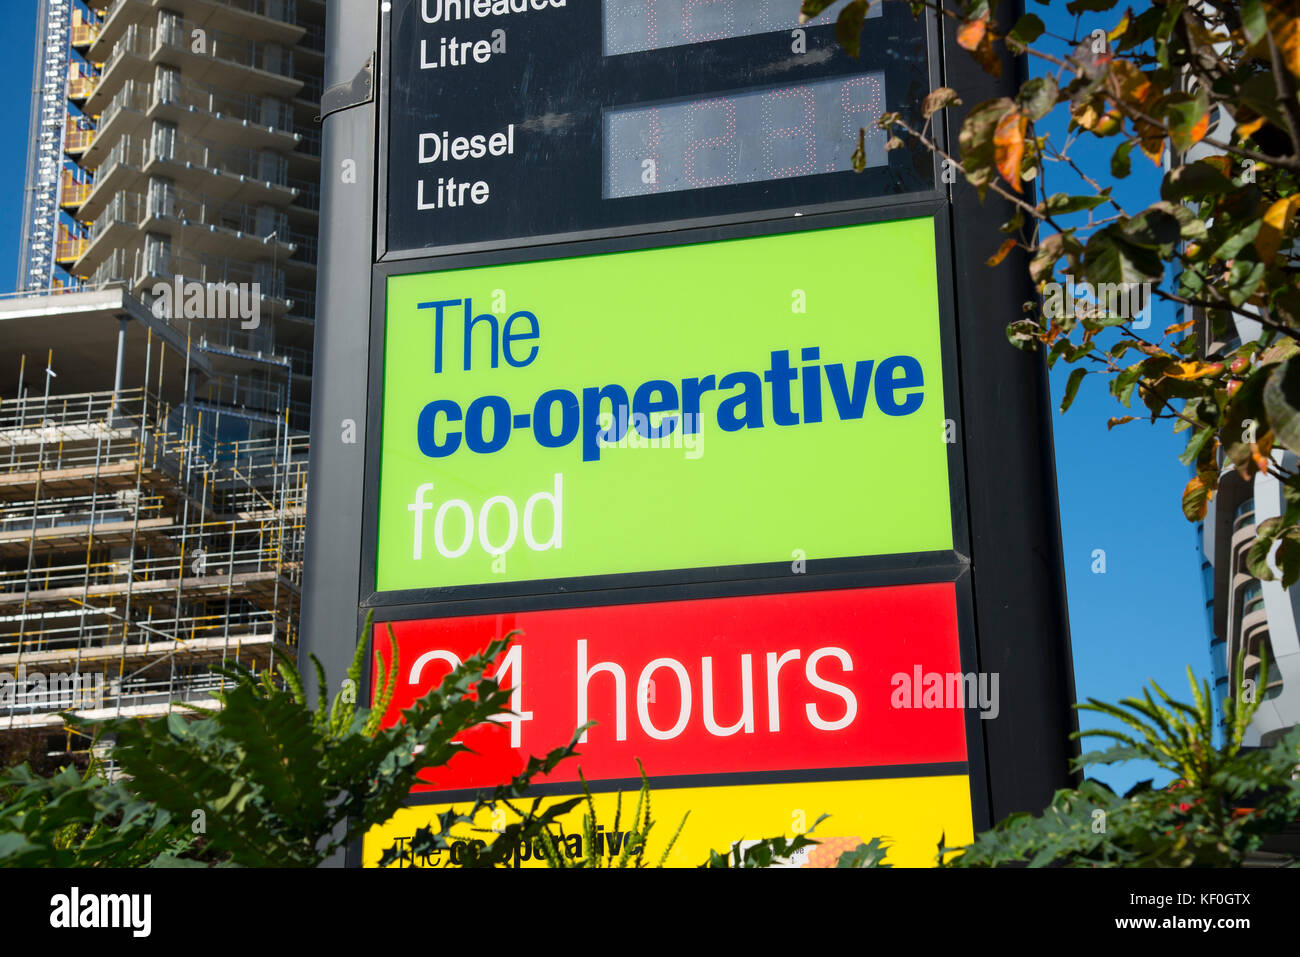 The Co-operative food sign at a restaurant, Kensington, London. Stock Photo